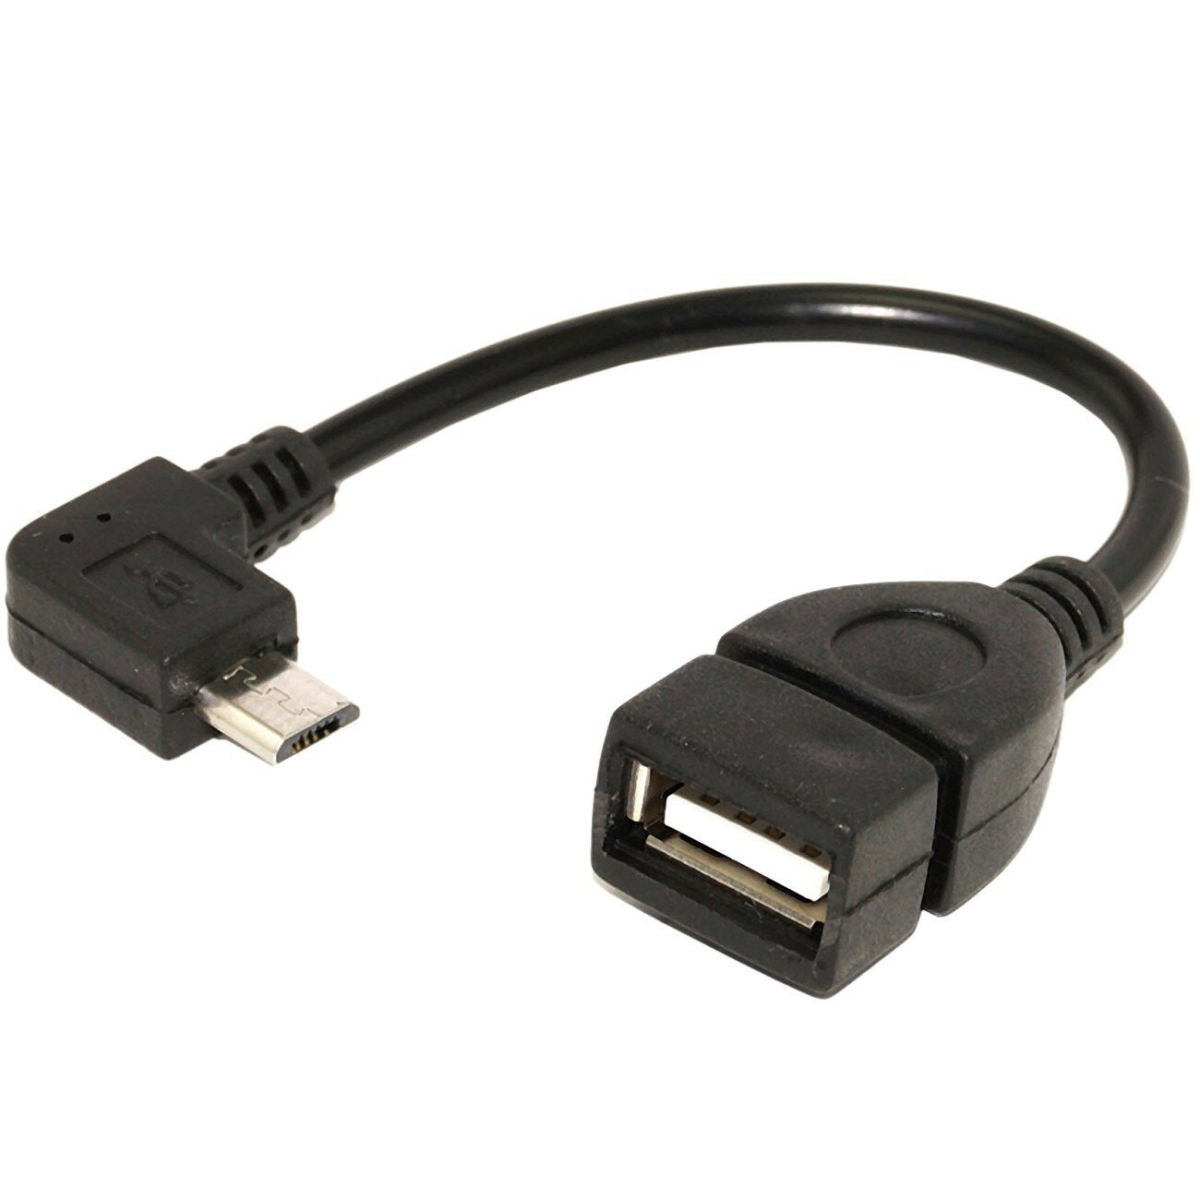 Picture of Sanoxy SANOXY-VNDR-otg-90 90 deg USB Female OTG to Micro USB Cable Male Adapter